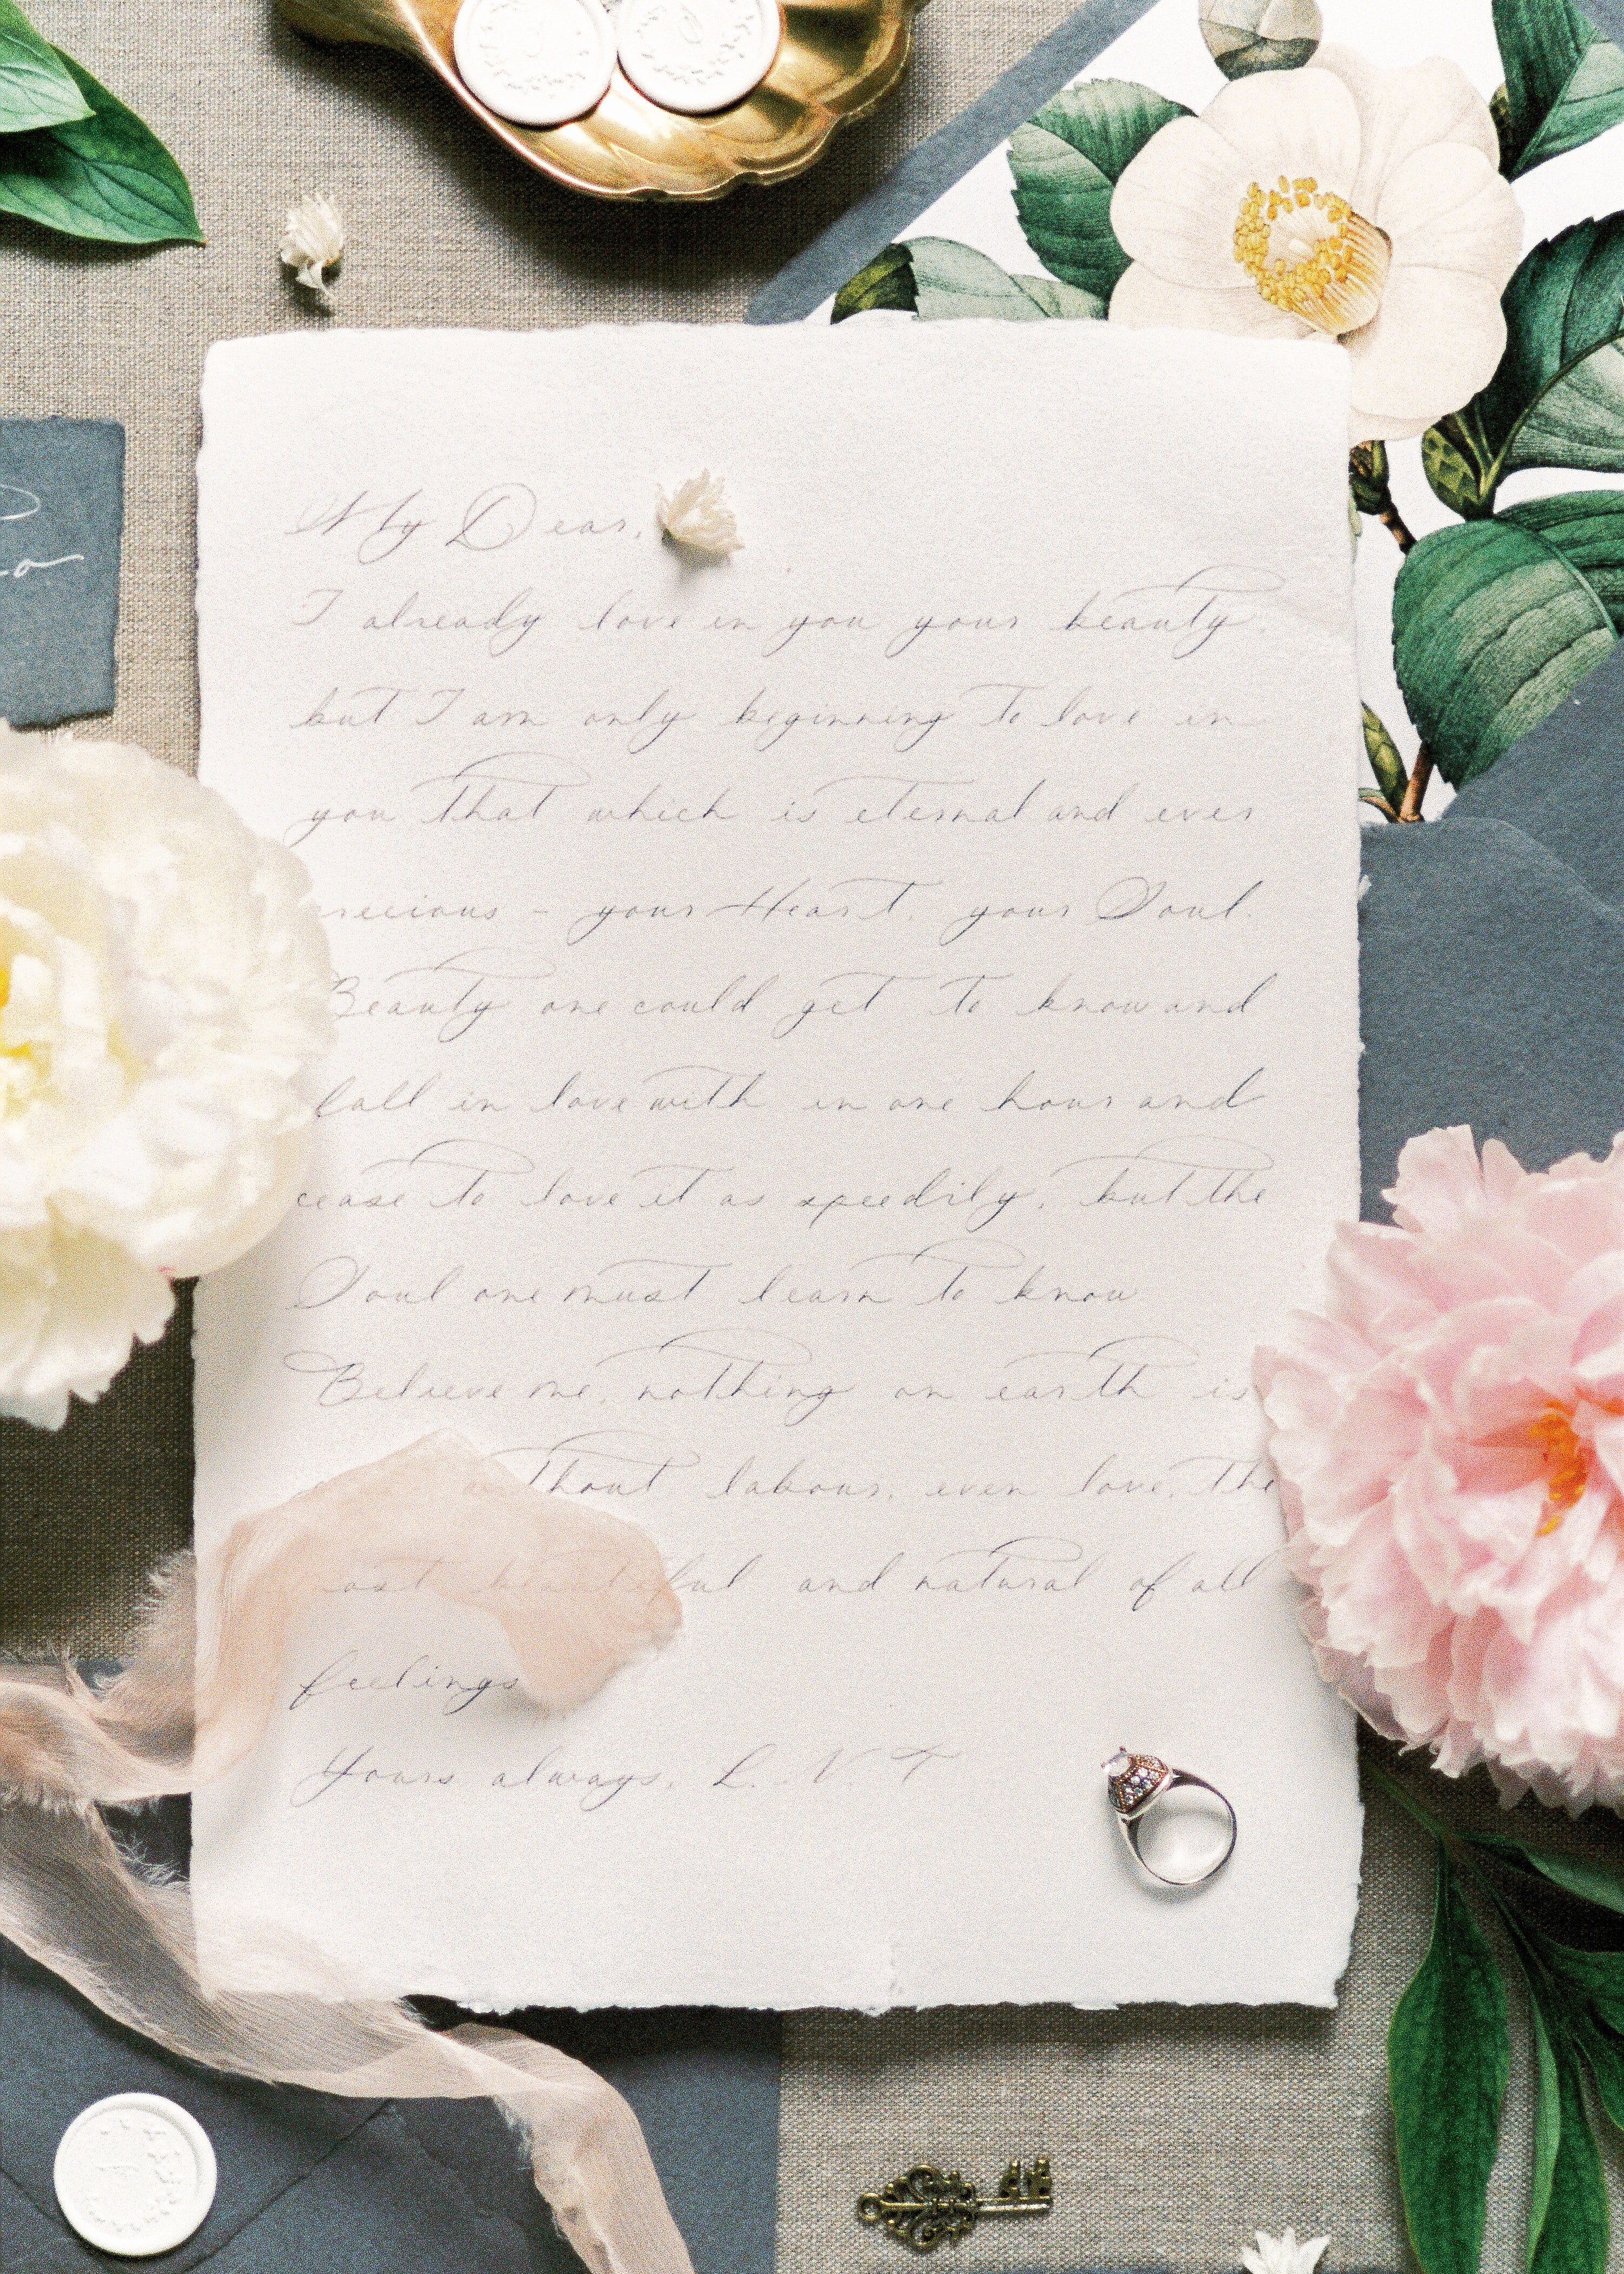 Mrs. Griffith left a note and ring | Photo: Pexels